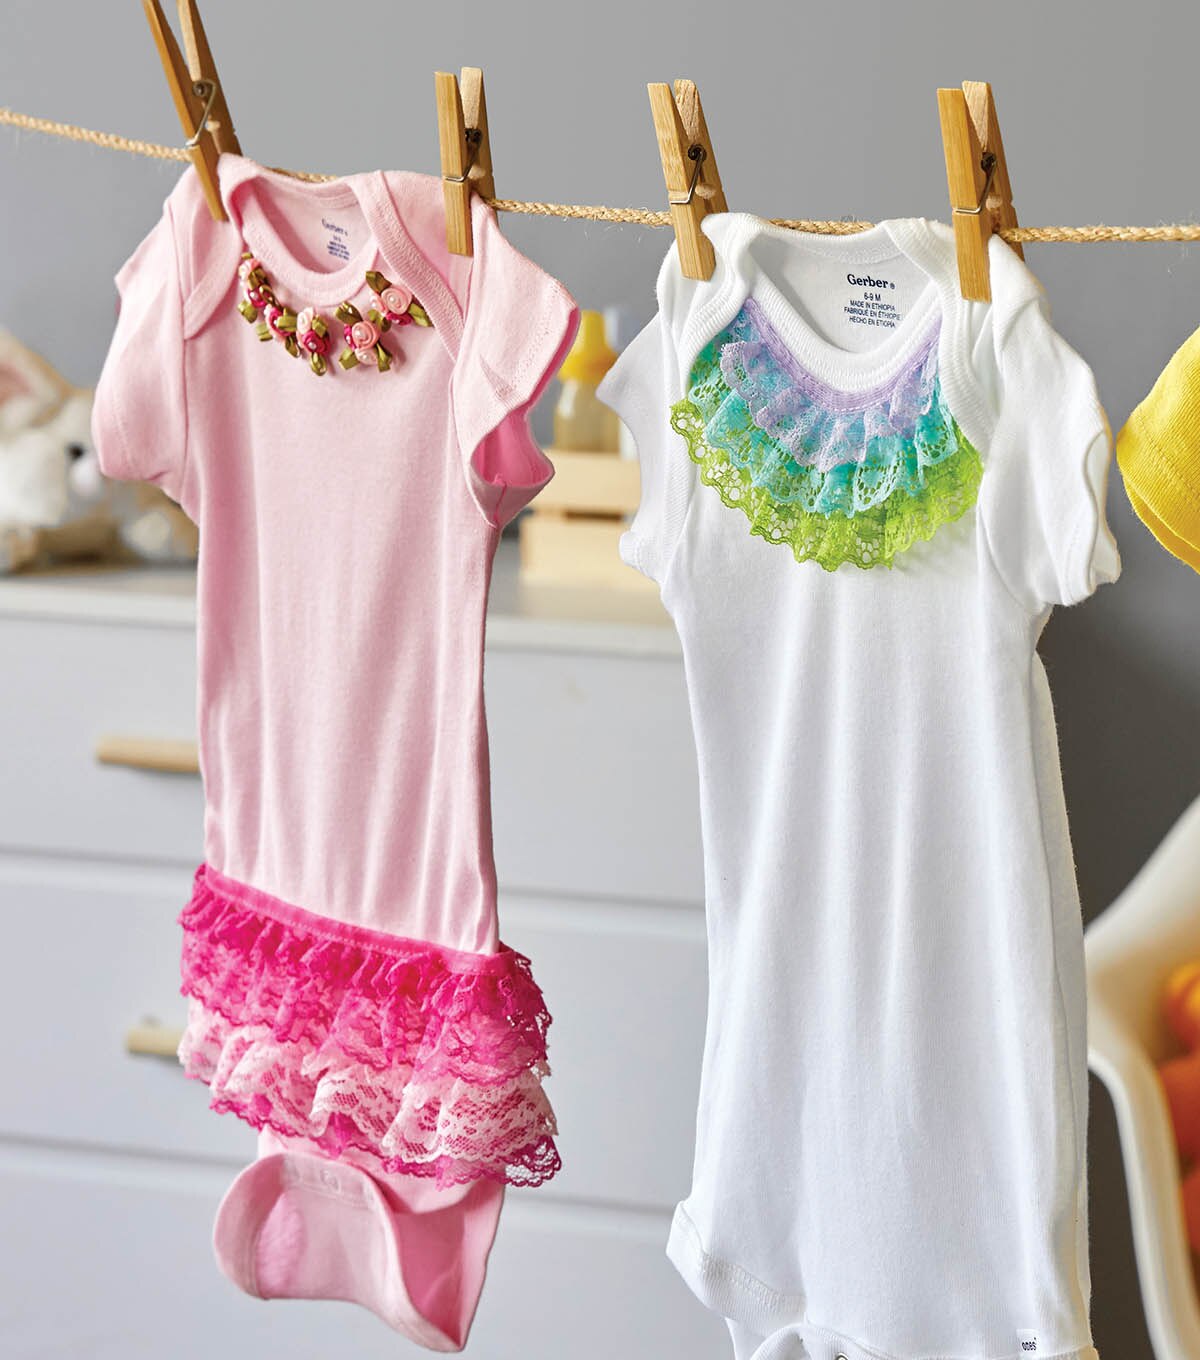 How To Make Lace Trimmed Baby Onesies | JOANN